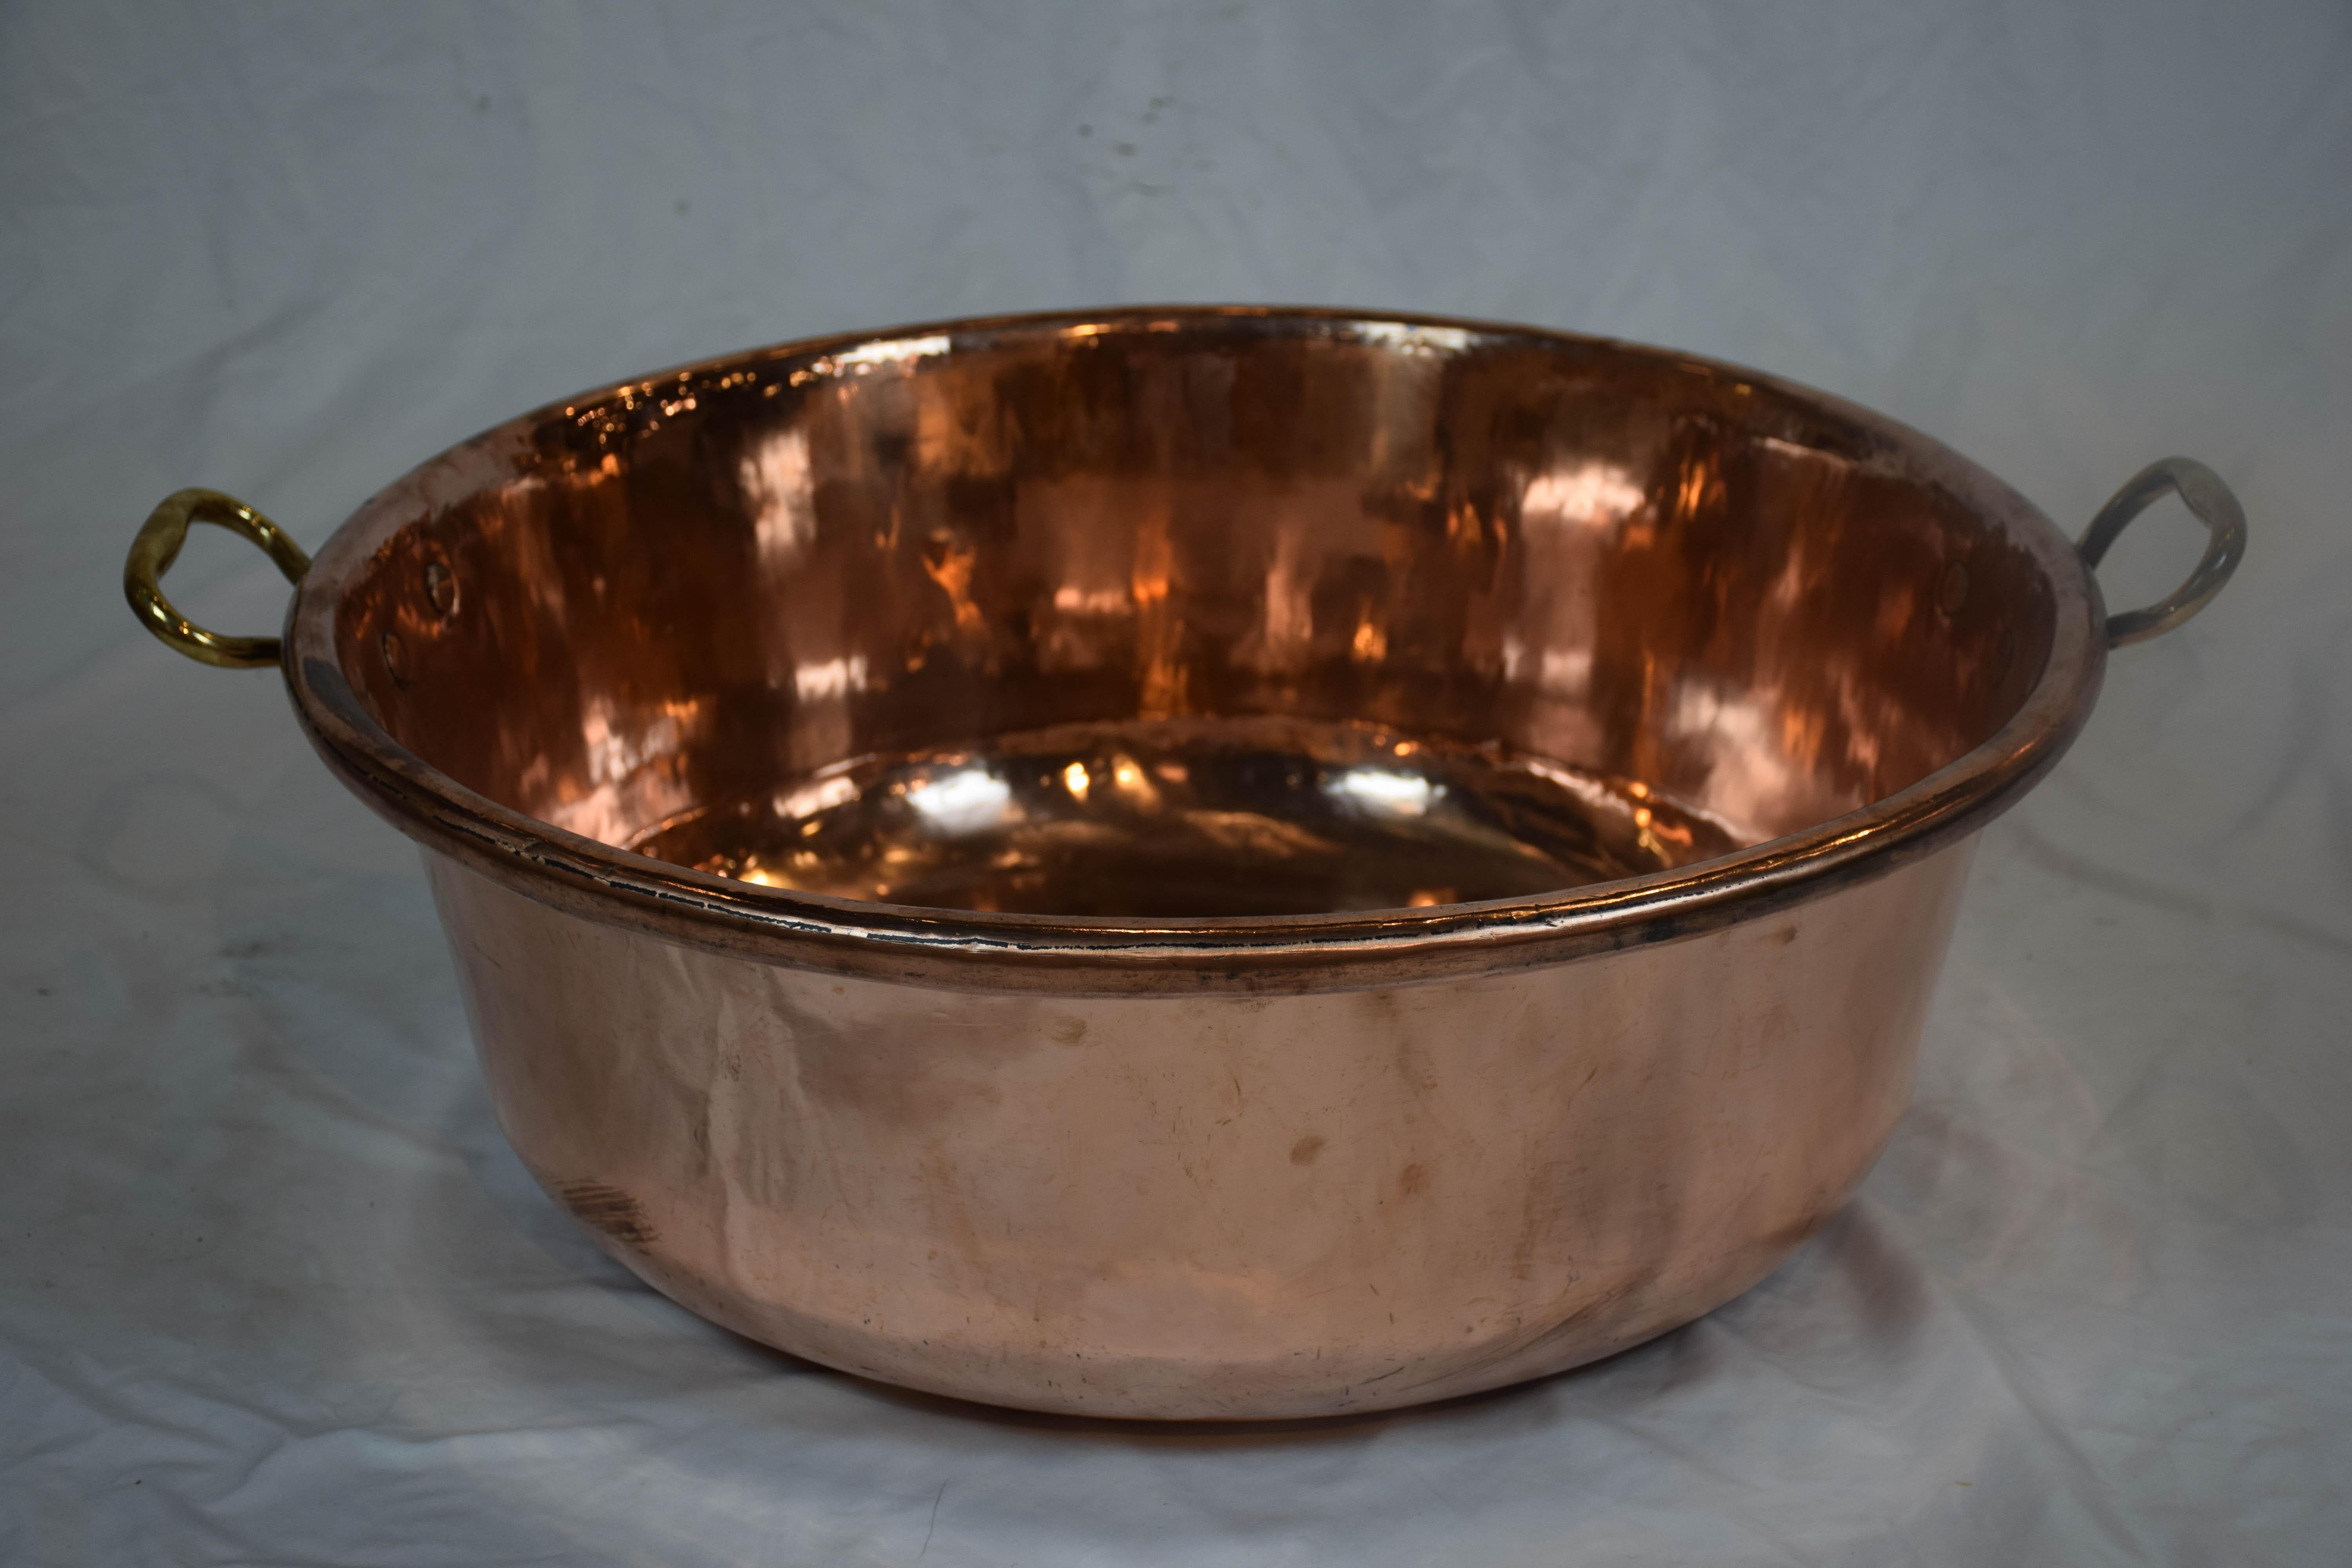 Large copper bowl with brass loop handle. Found in England. This beautiful copper bowl will make a nice addition to any kitchen decor.